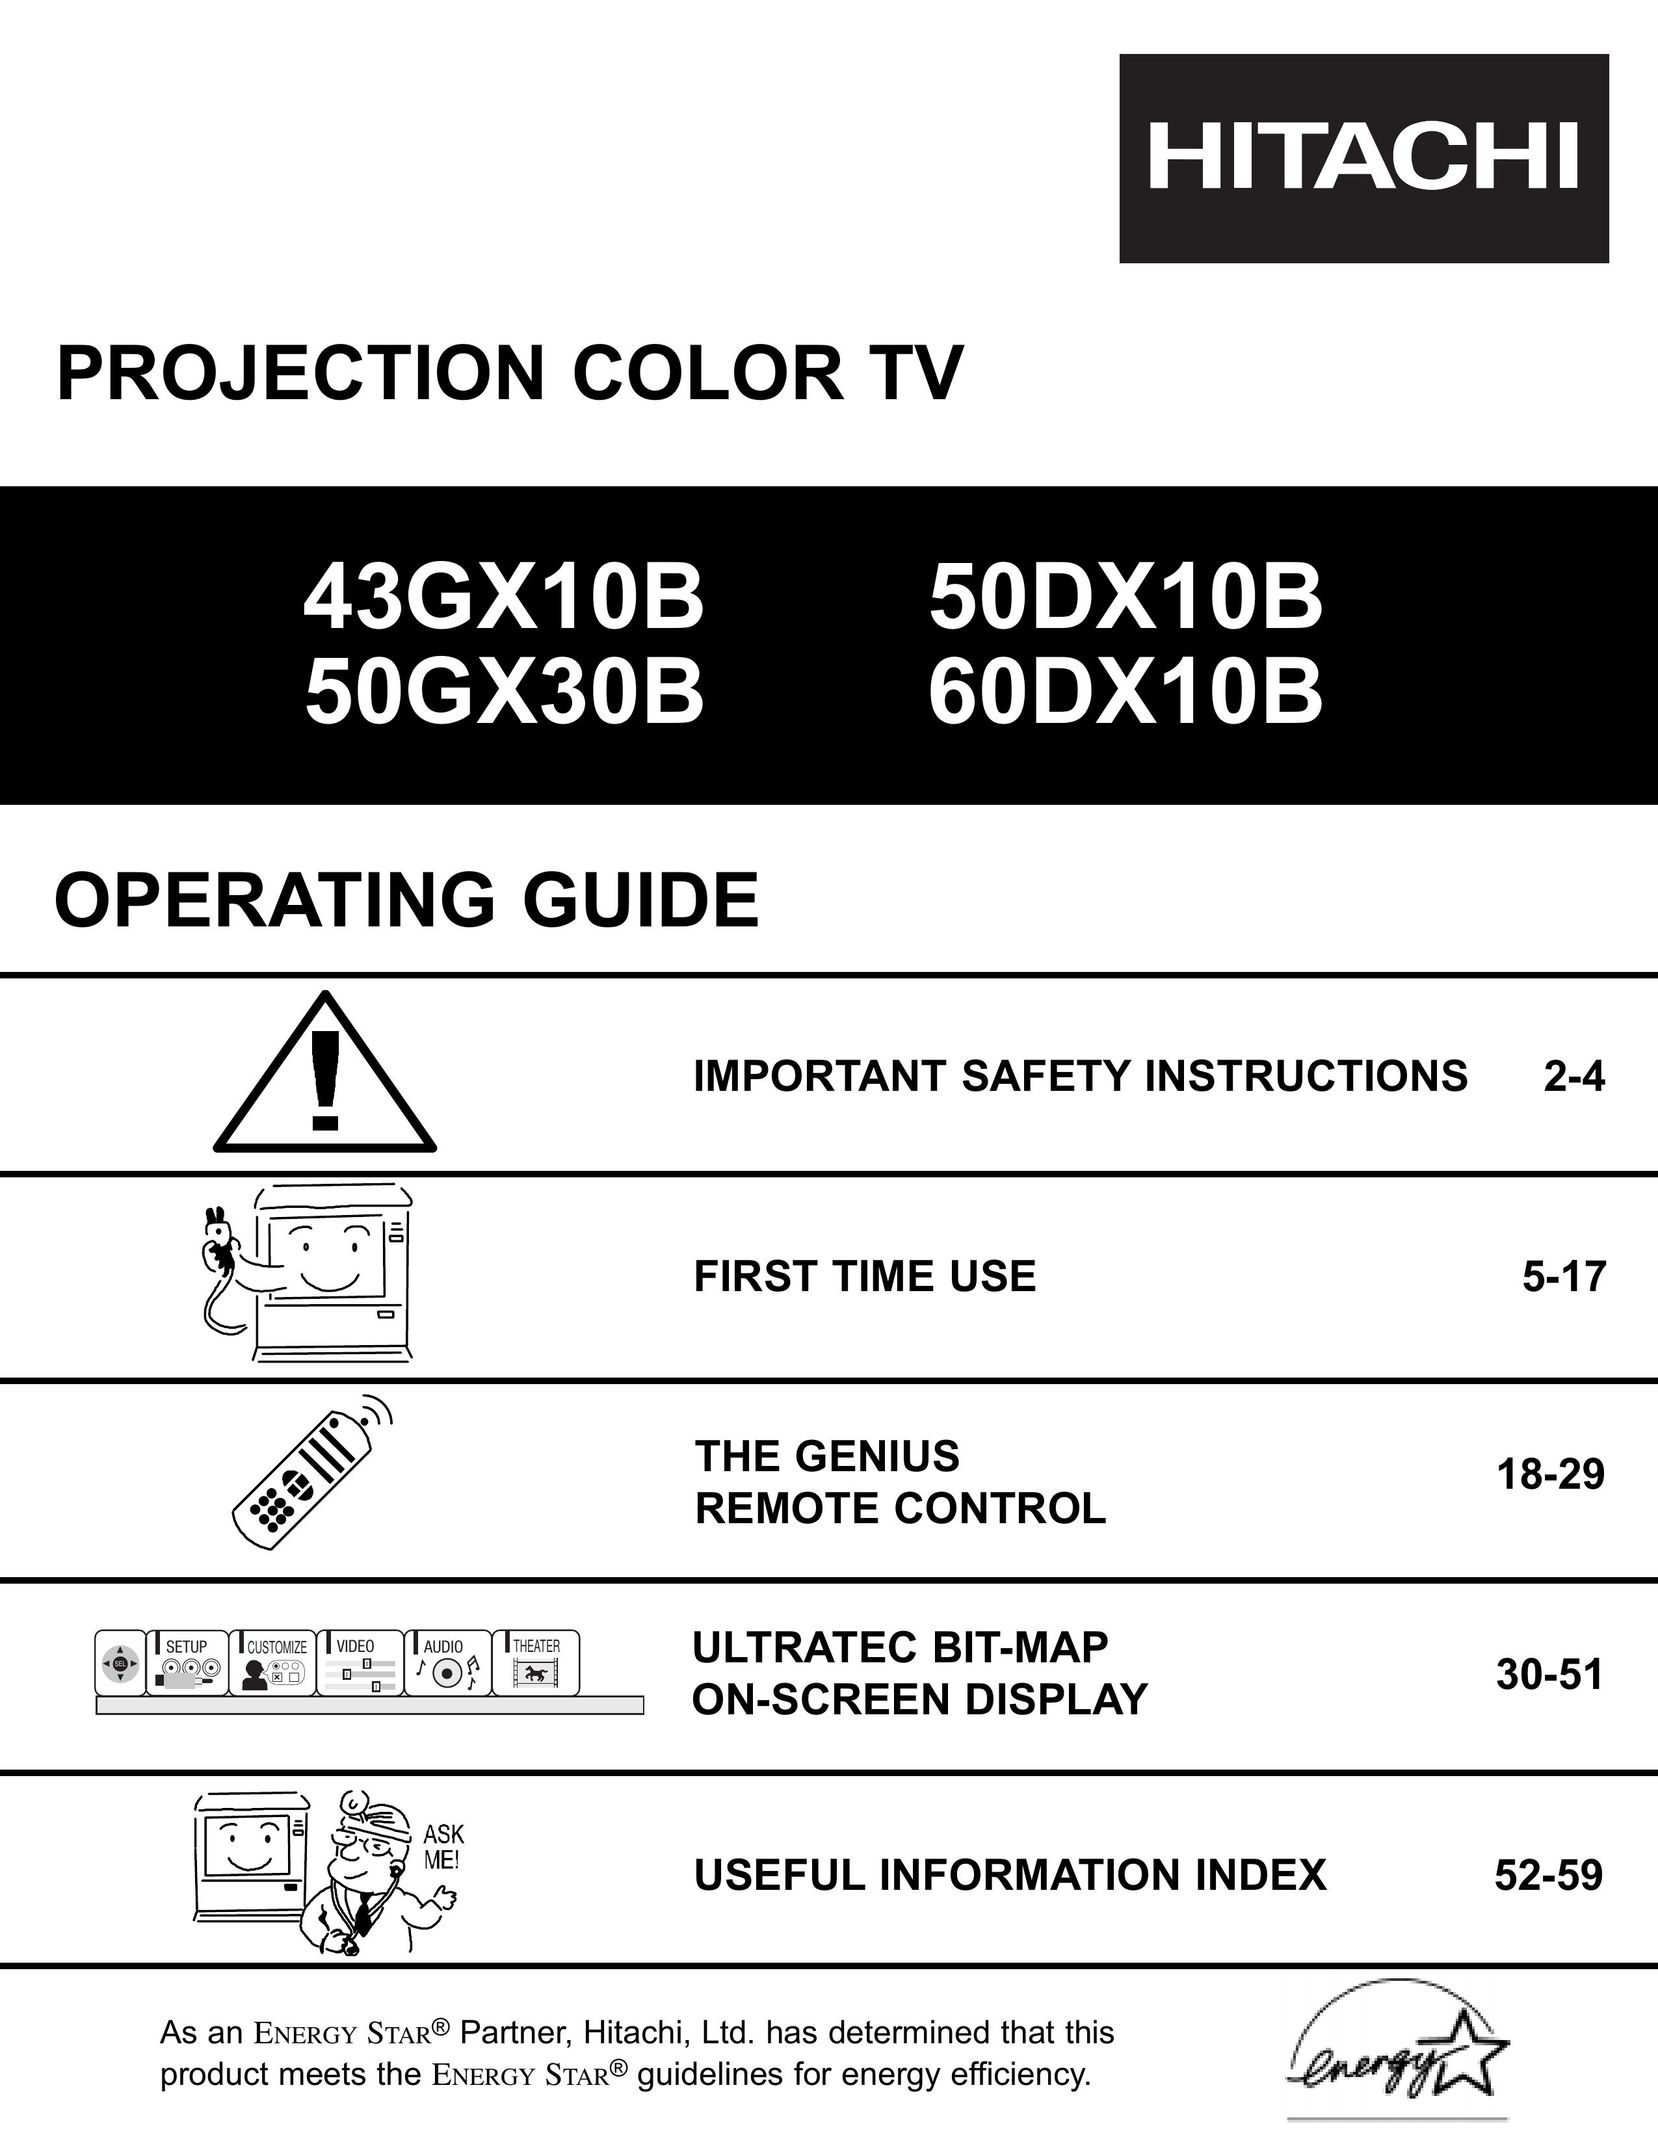 Hitachi 50DX10B Projection Television User Manual